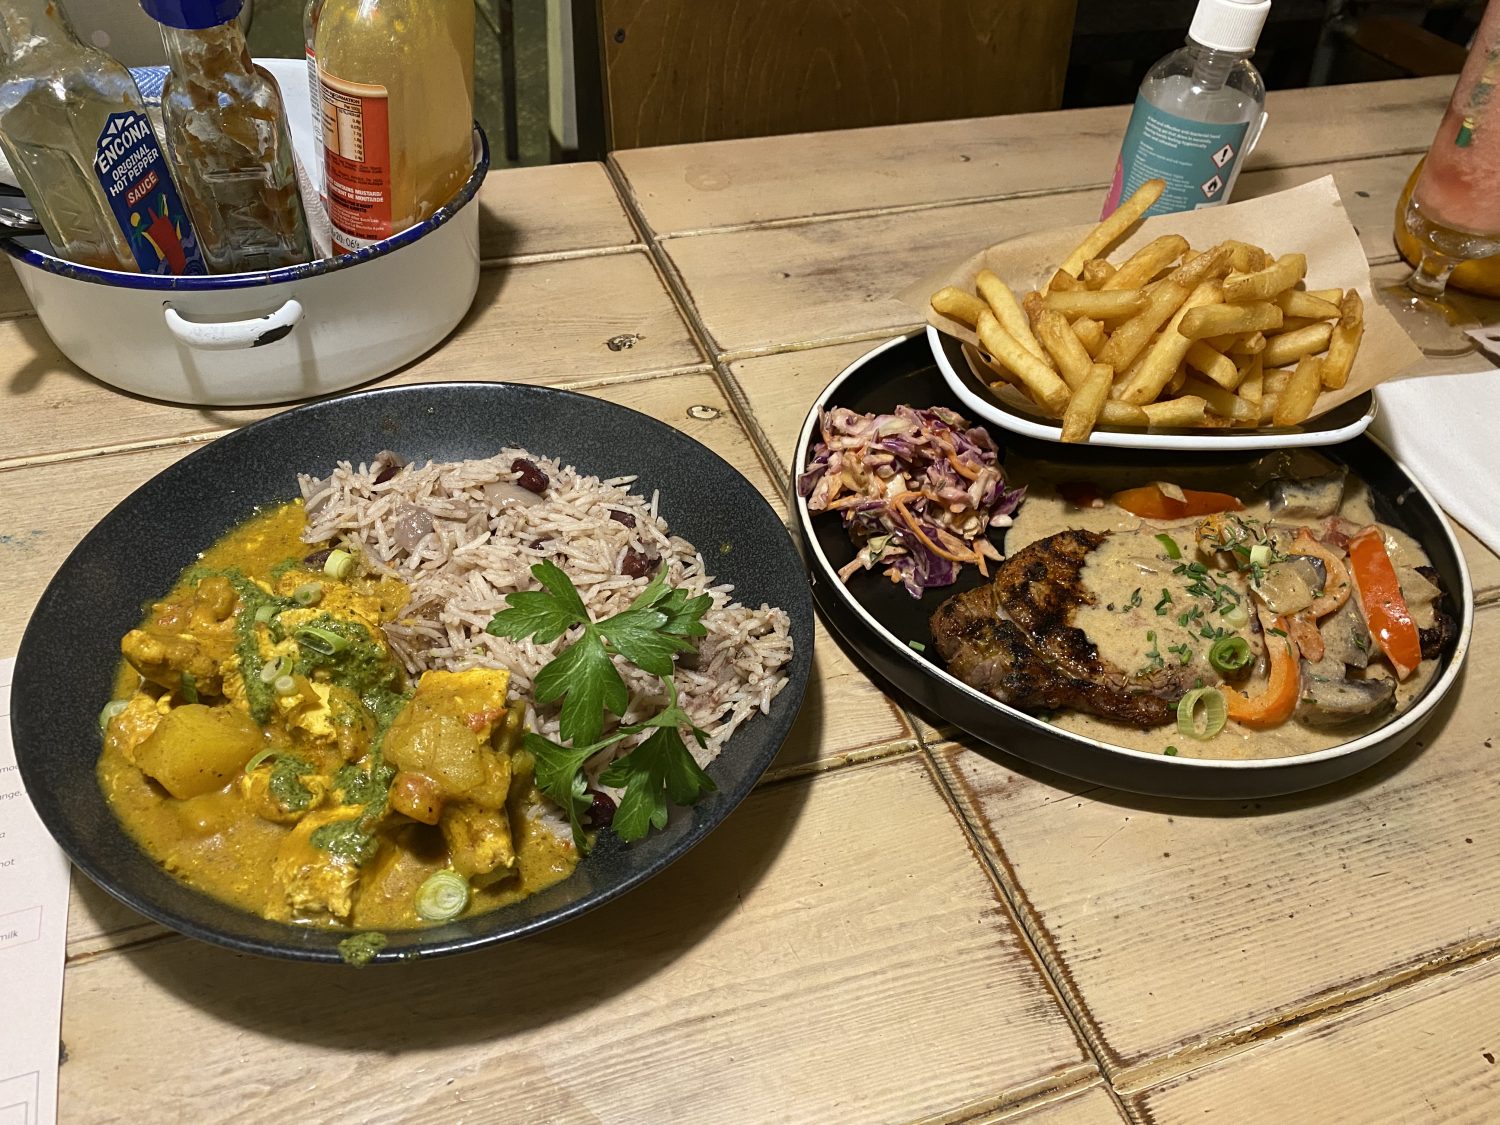 Great Food at Turtle Bay in Liverpoola